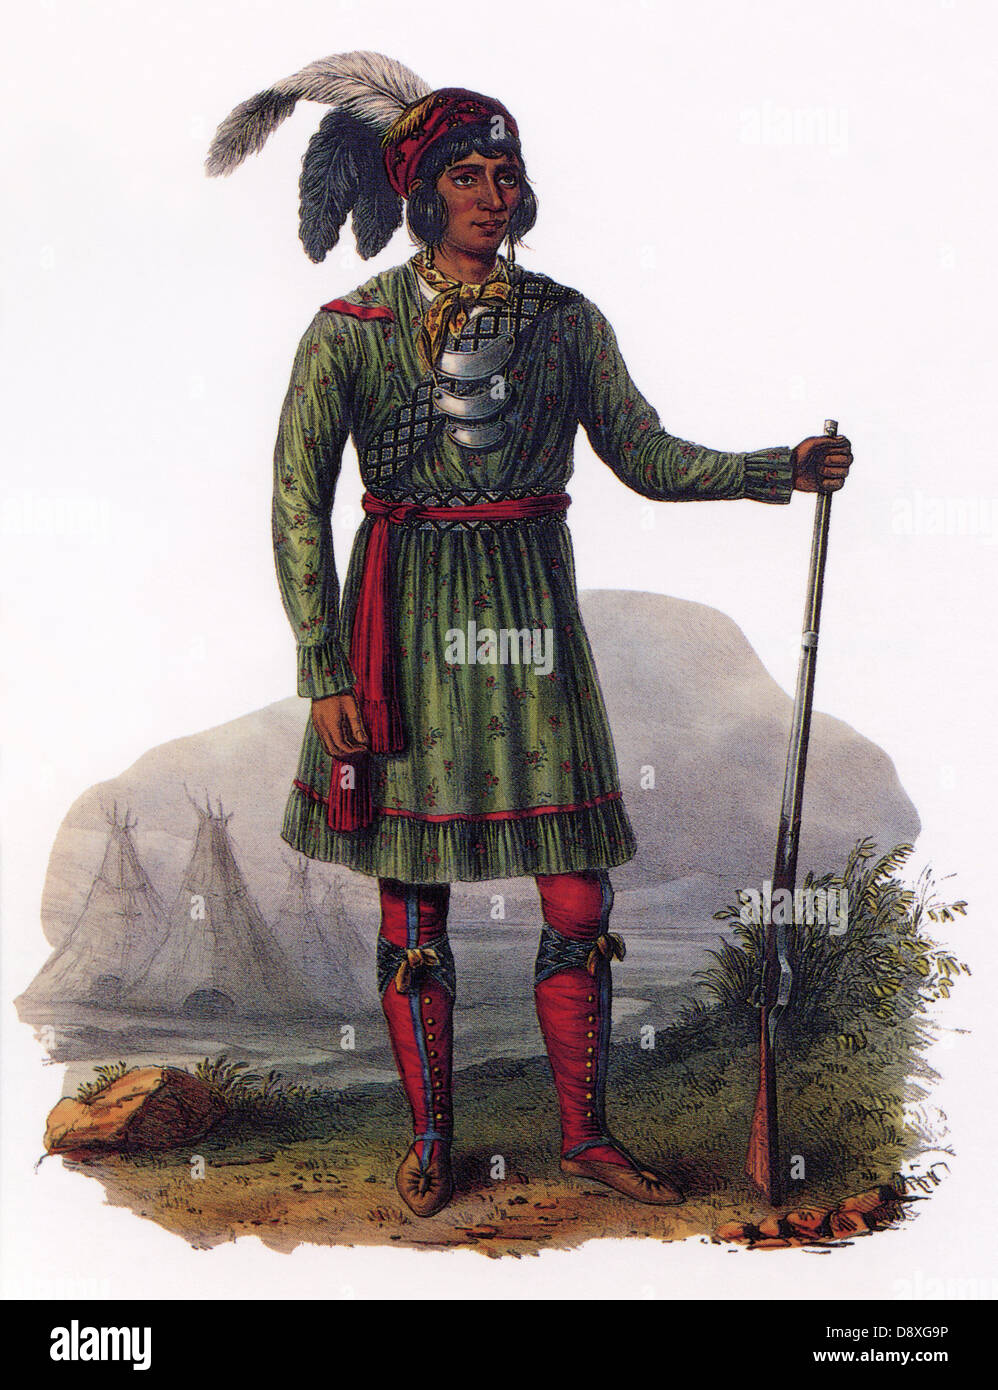 Asseola, (Osceola), chef séminole, Native American Indian, 1838 Banque D'Images